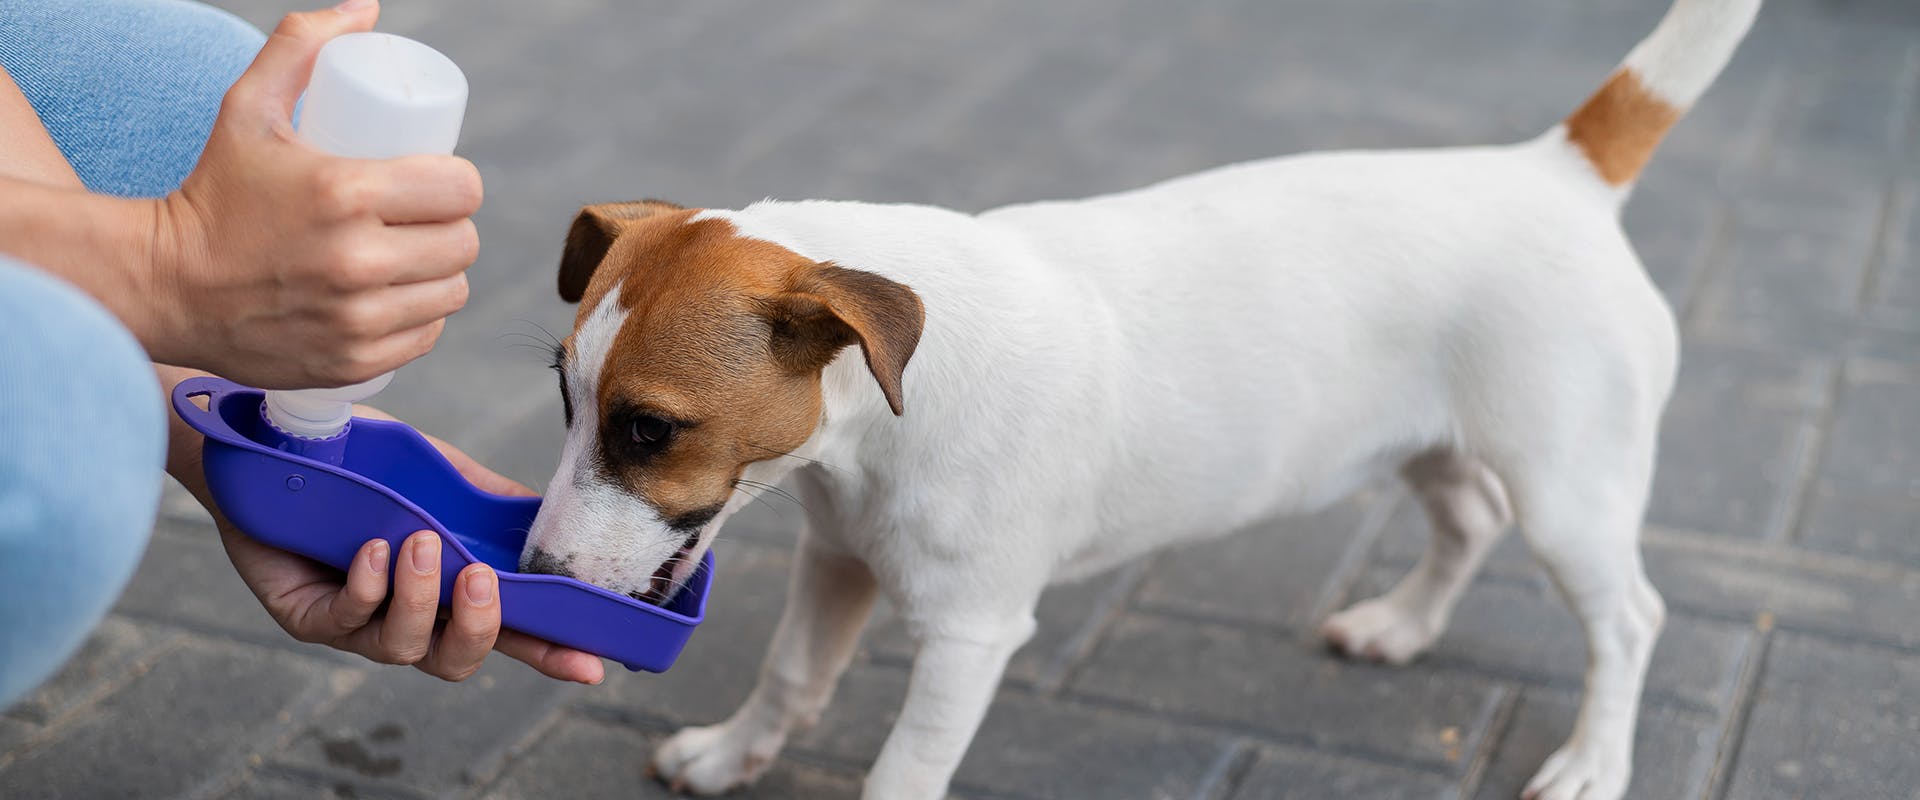 https://images.prismic.io/trustedhousesitters/5db9e1ea-0ce8-4713-bf2c-9142f234f22c_dog+water+bottle.png?auto=compress,format&rect=0,0,1920,800&w=1920&h=800